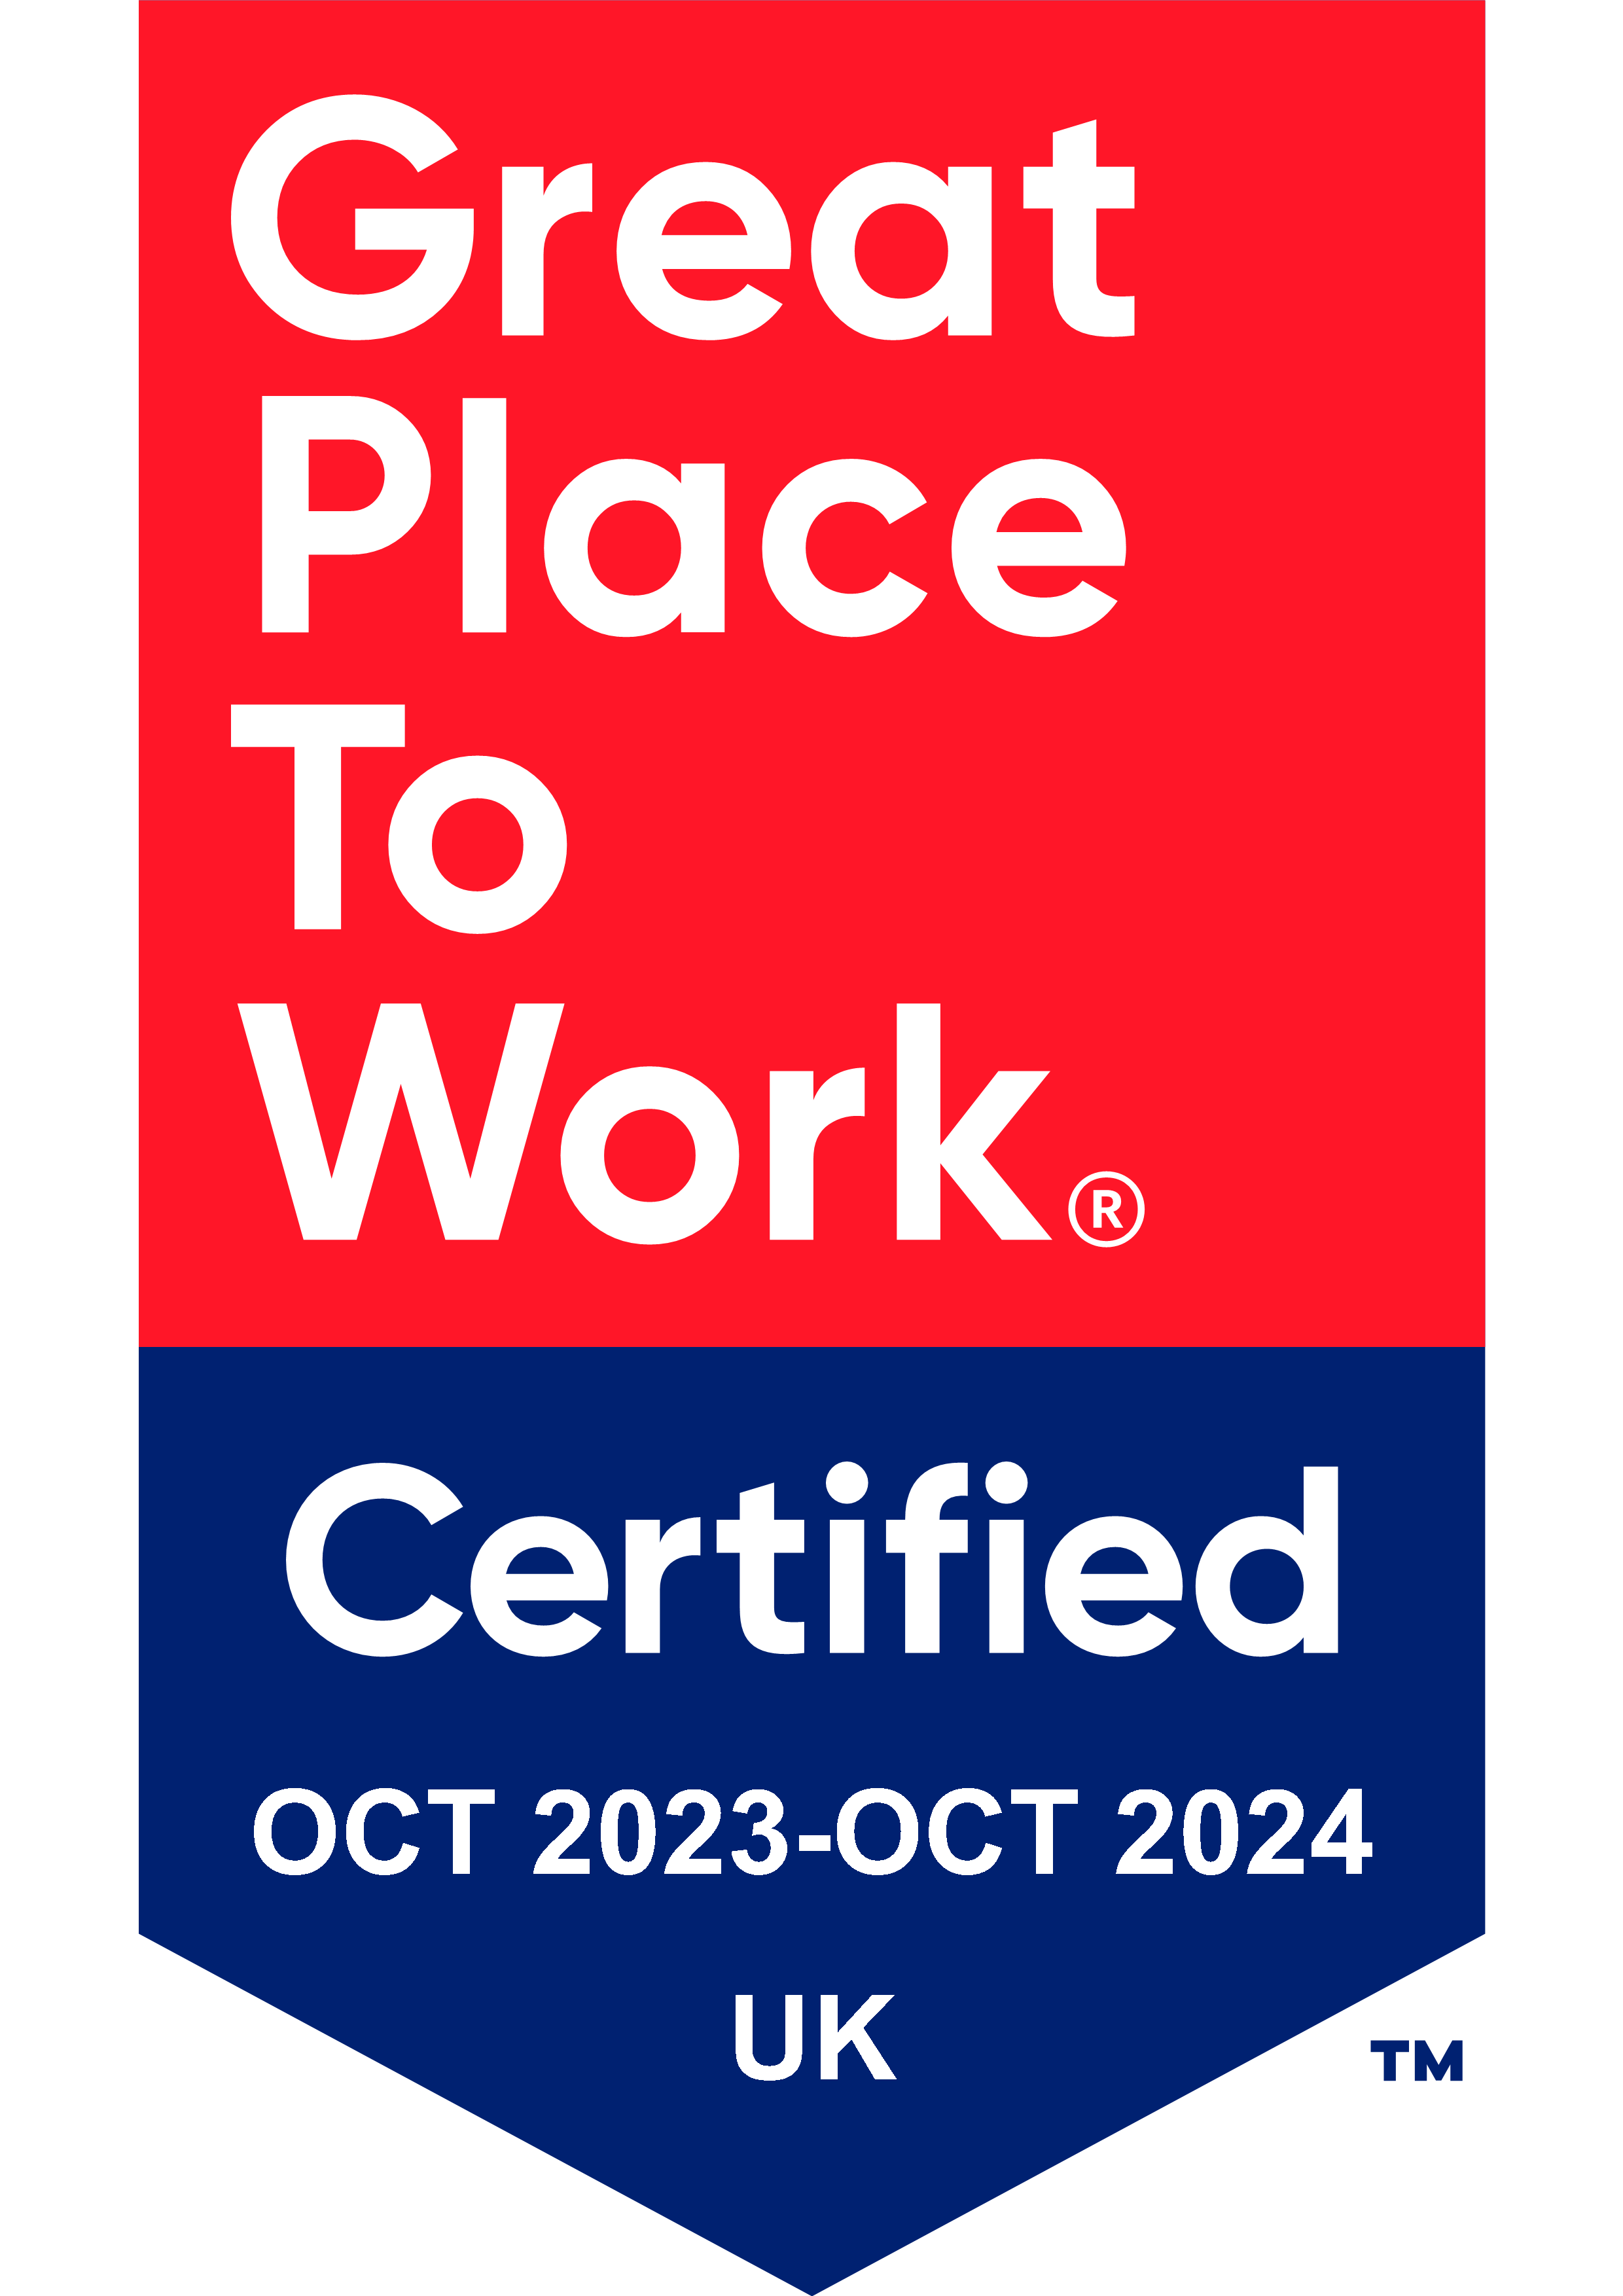 Great Place To Work | Certified OCT 2023-OCT 2024 UK